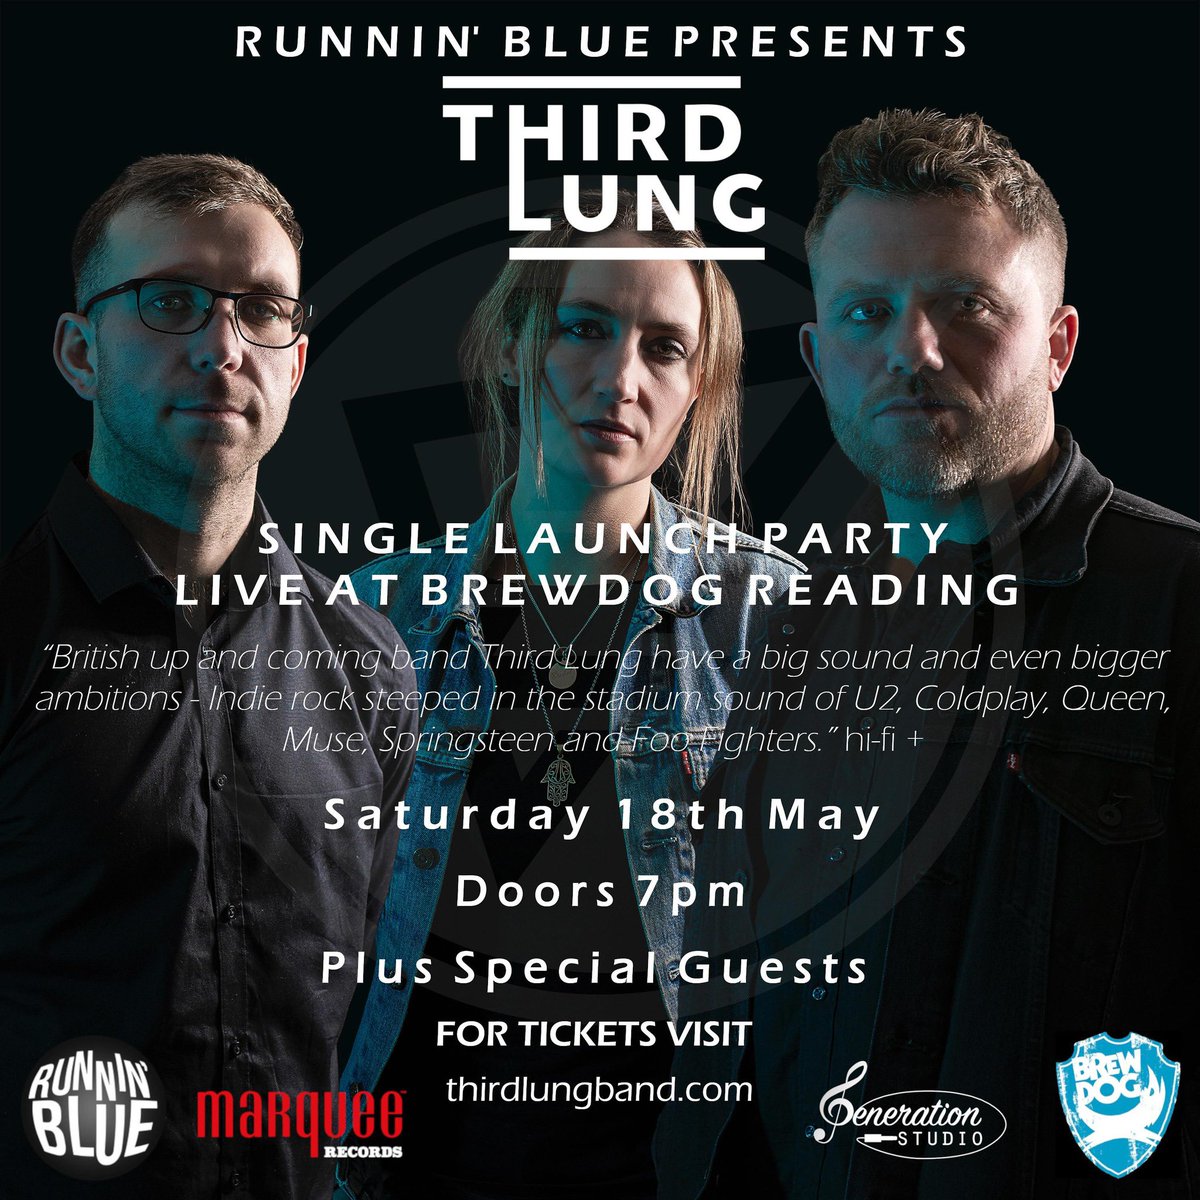 Catch @ThirdLungUK live as they’re back at @BrewdogReading for their single launch party on Sat 18th May, doors 7pm. The last time the band played at BrewDog it sold out! Visit the Gigs section of our website for more info marquee-records.co.uk/event/third-lu…